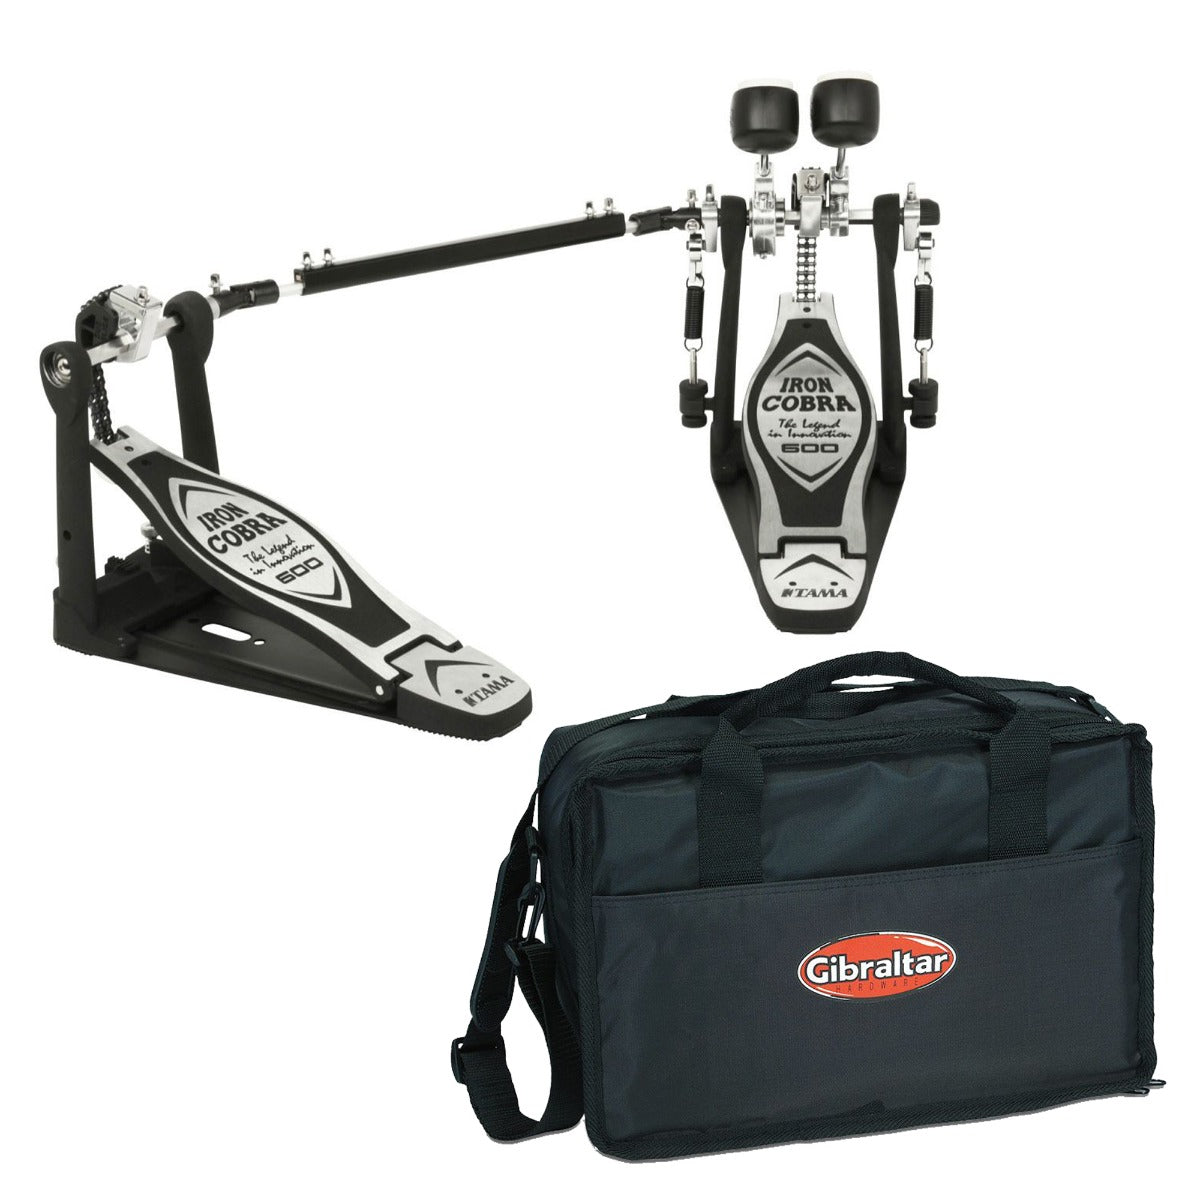 Image of TAMA HP600DTW Iron Cobra Double Bass Drum Pedal and carry bag kit